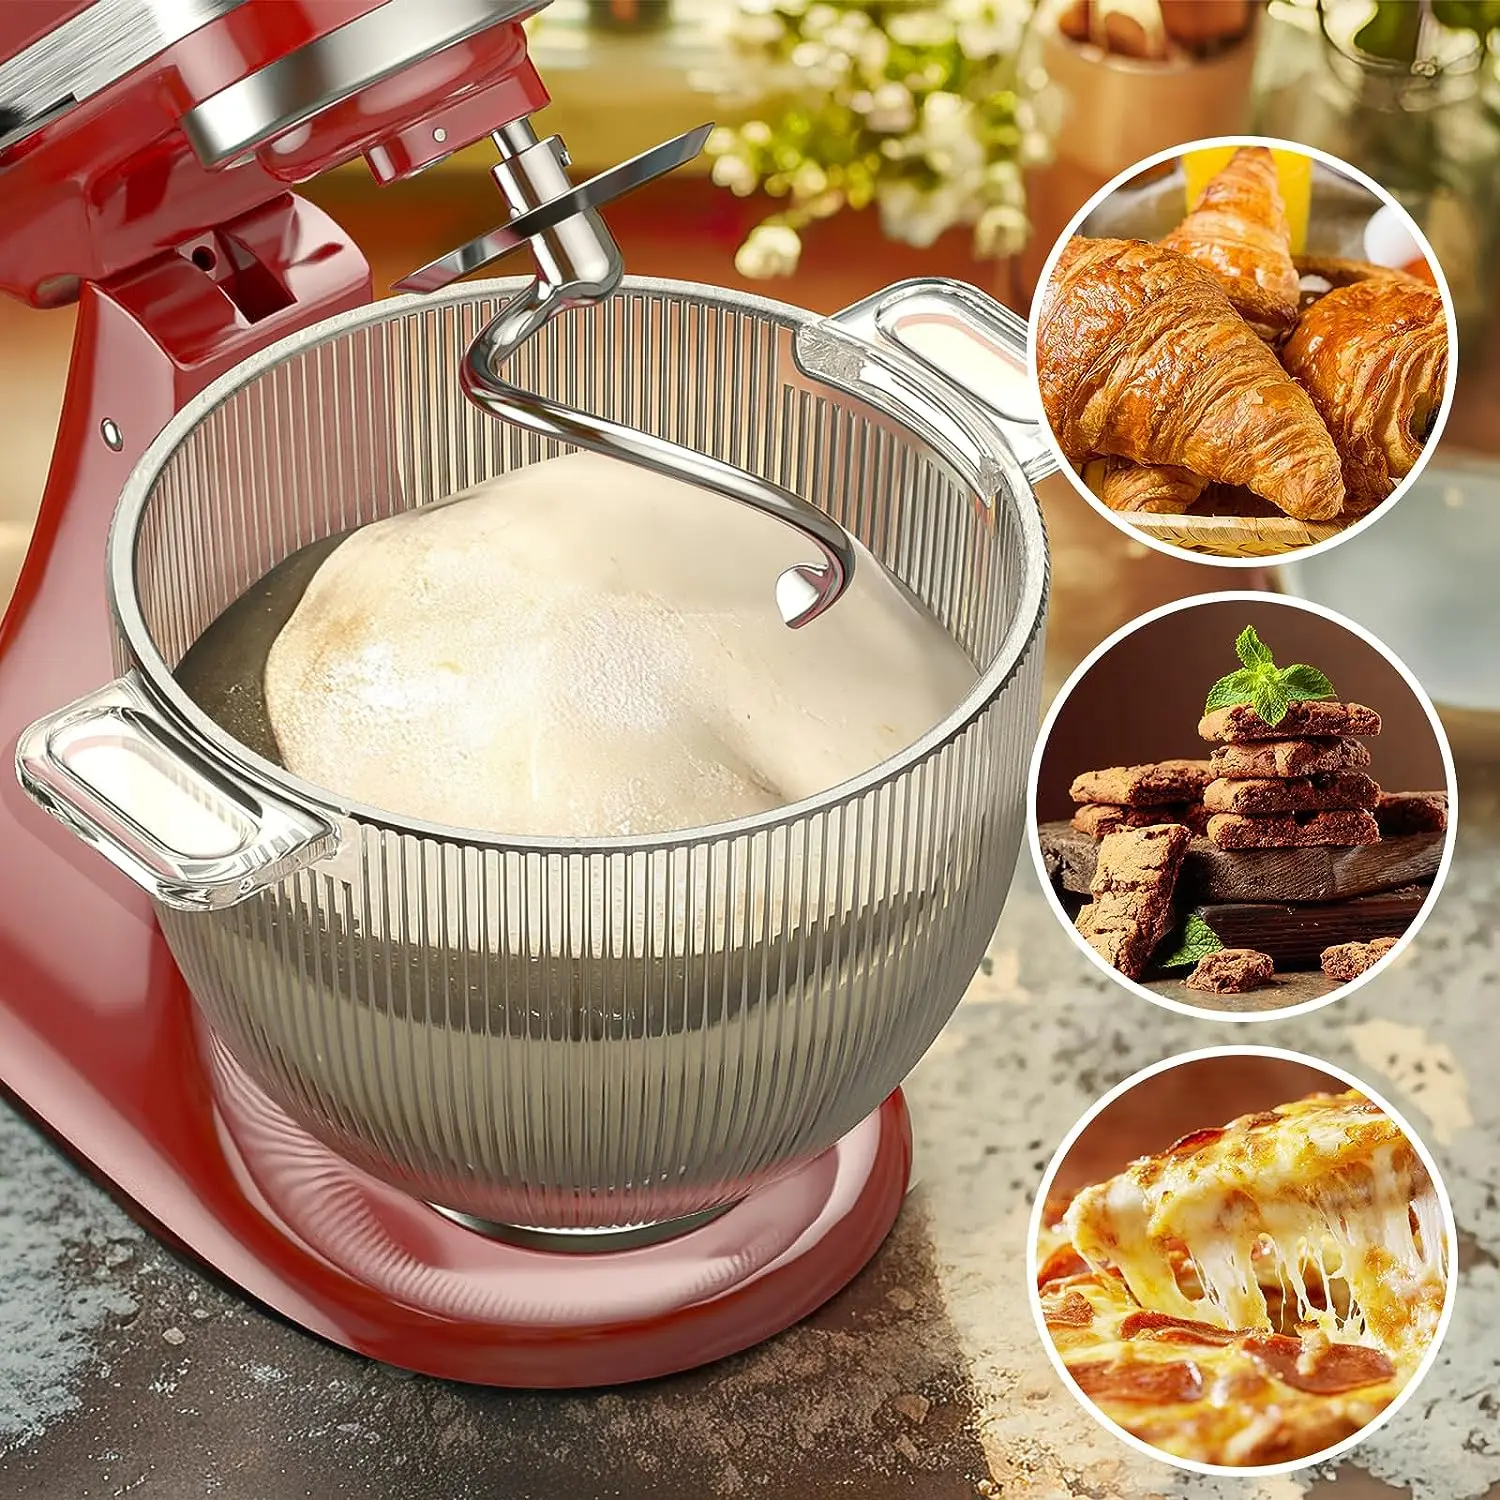 https://ae01.alicdn.com/kf/Sd8c52e93f4fa4d96a2b727f1d7a03b23G/Glass-Bread-Bowl-with-Baking-Lid-for-Kitchenaid-Stand-Mixer-Competible-with-Kitchenaid-4-5-5Qt.jpg